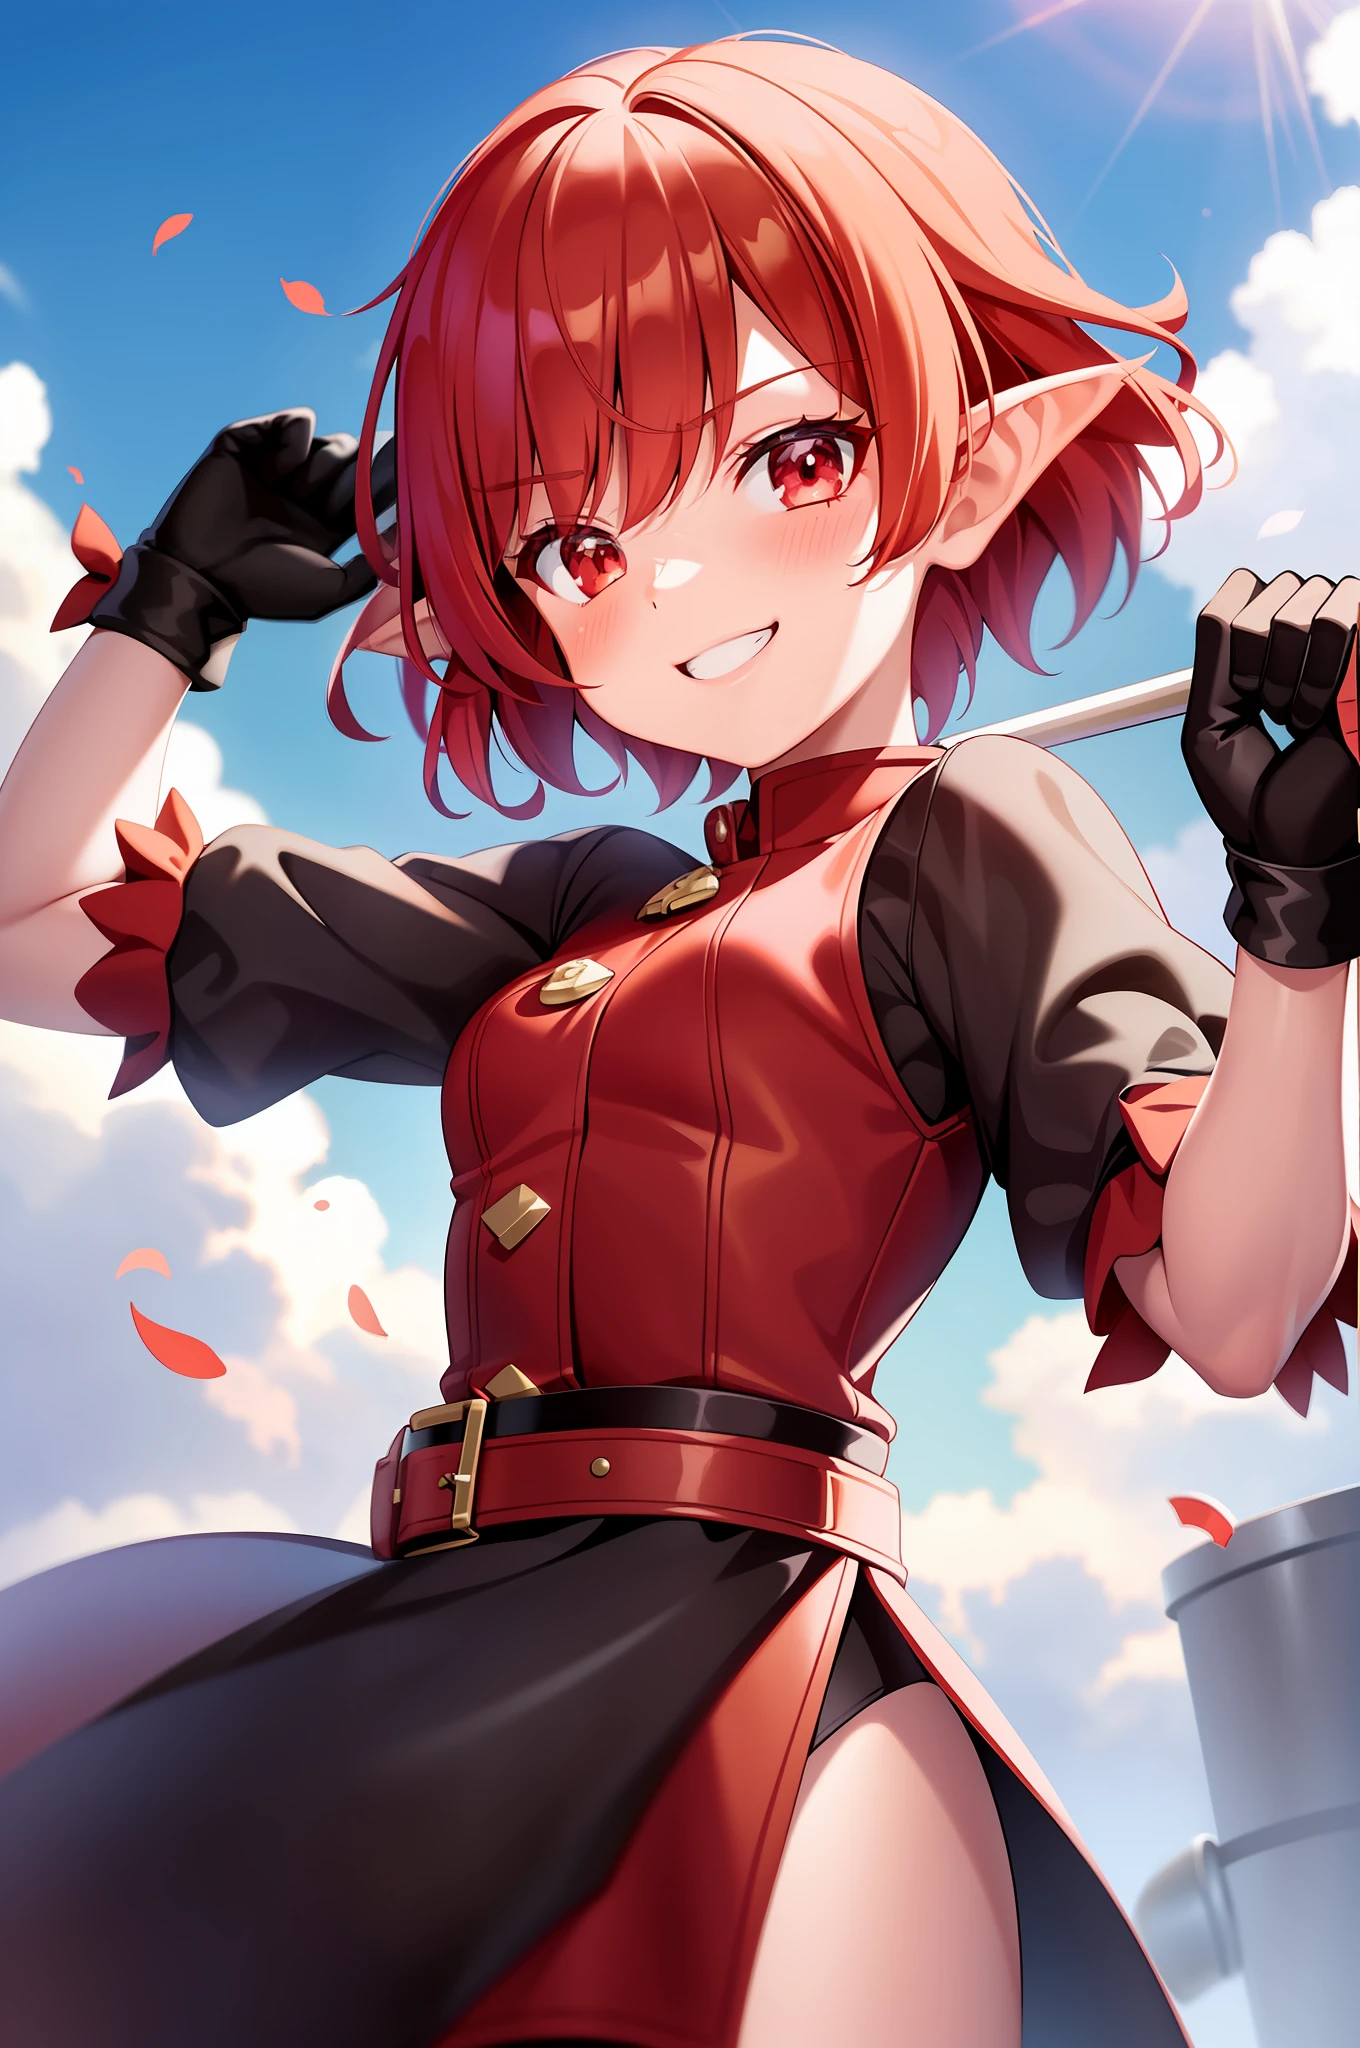 1 Girl, red_eyes,pointy_ears, short_hair,Redhead,red_hair, Solo, Sleeveless, short_sleeves, puffy_sleeves, puffy_short_sleeves, brown_jacket, Dwarf, Redhead, Smile, Bangs, Grinning, Small, Sunlight, Rays, Blacksmith, Gloves, Hammer, Short Stures